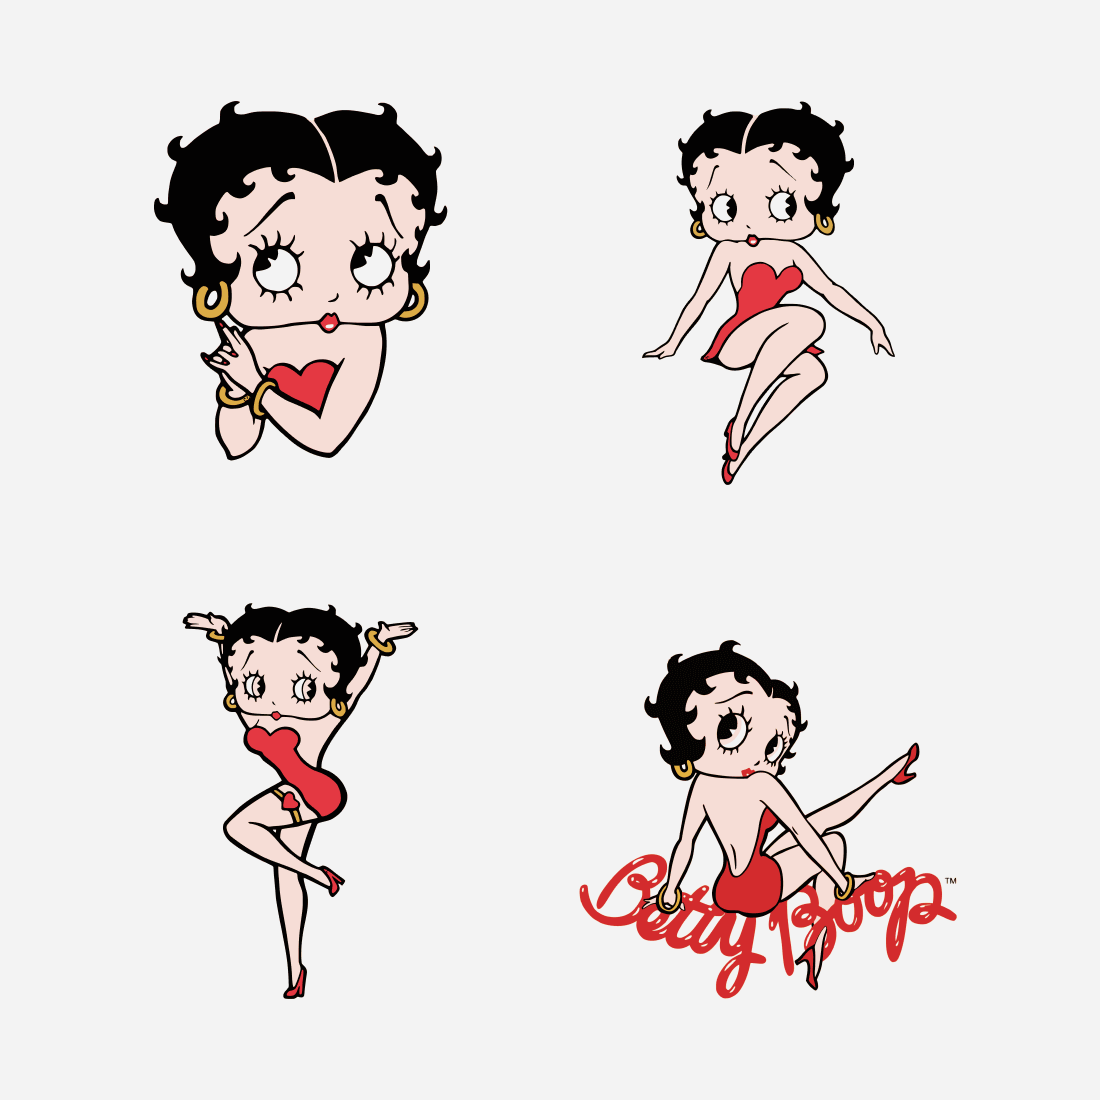 Betty Boop in a red dress posing.